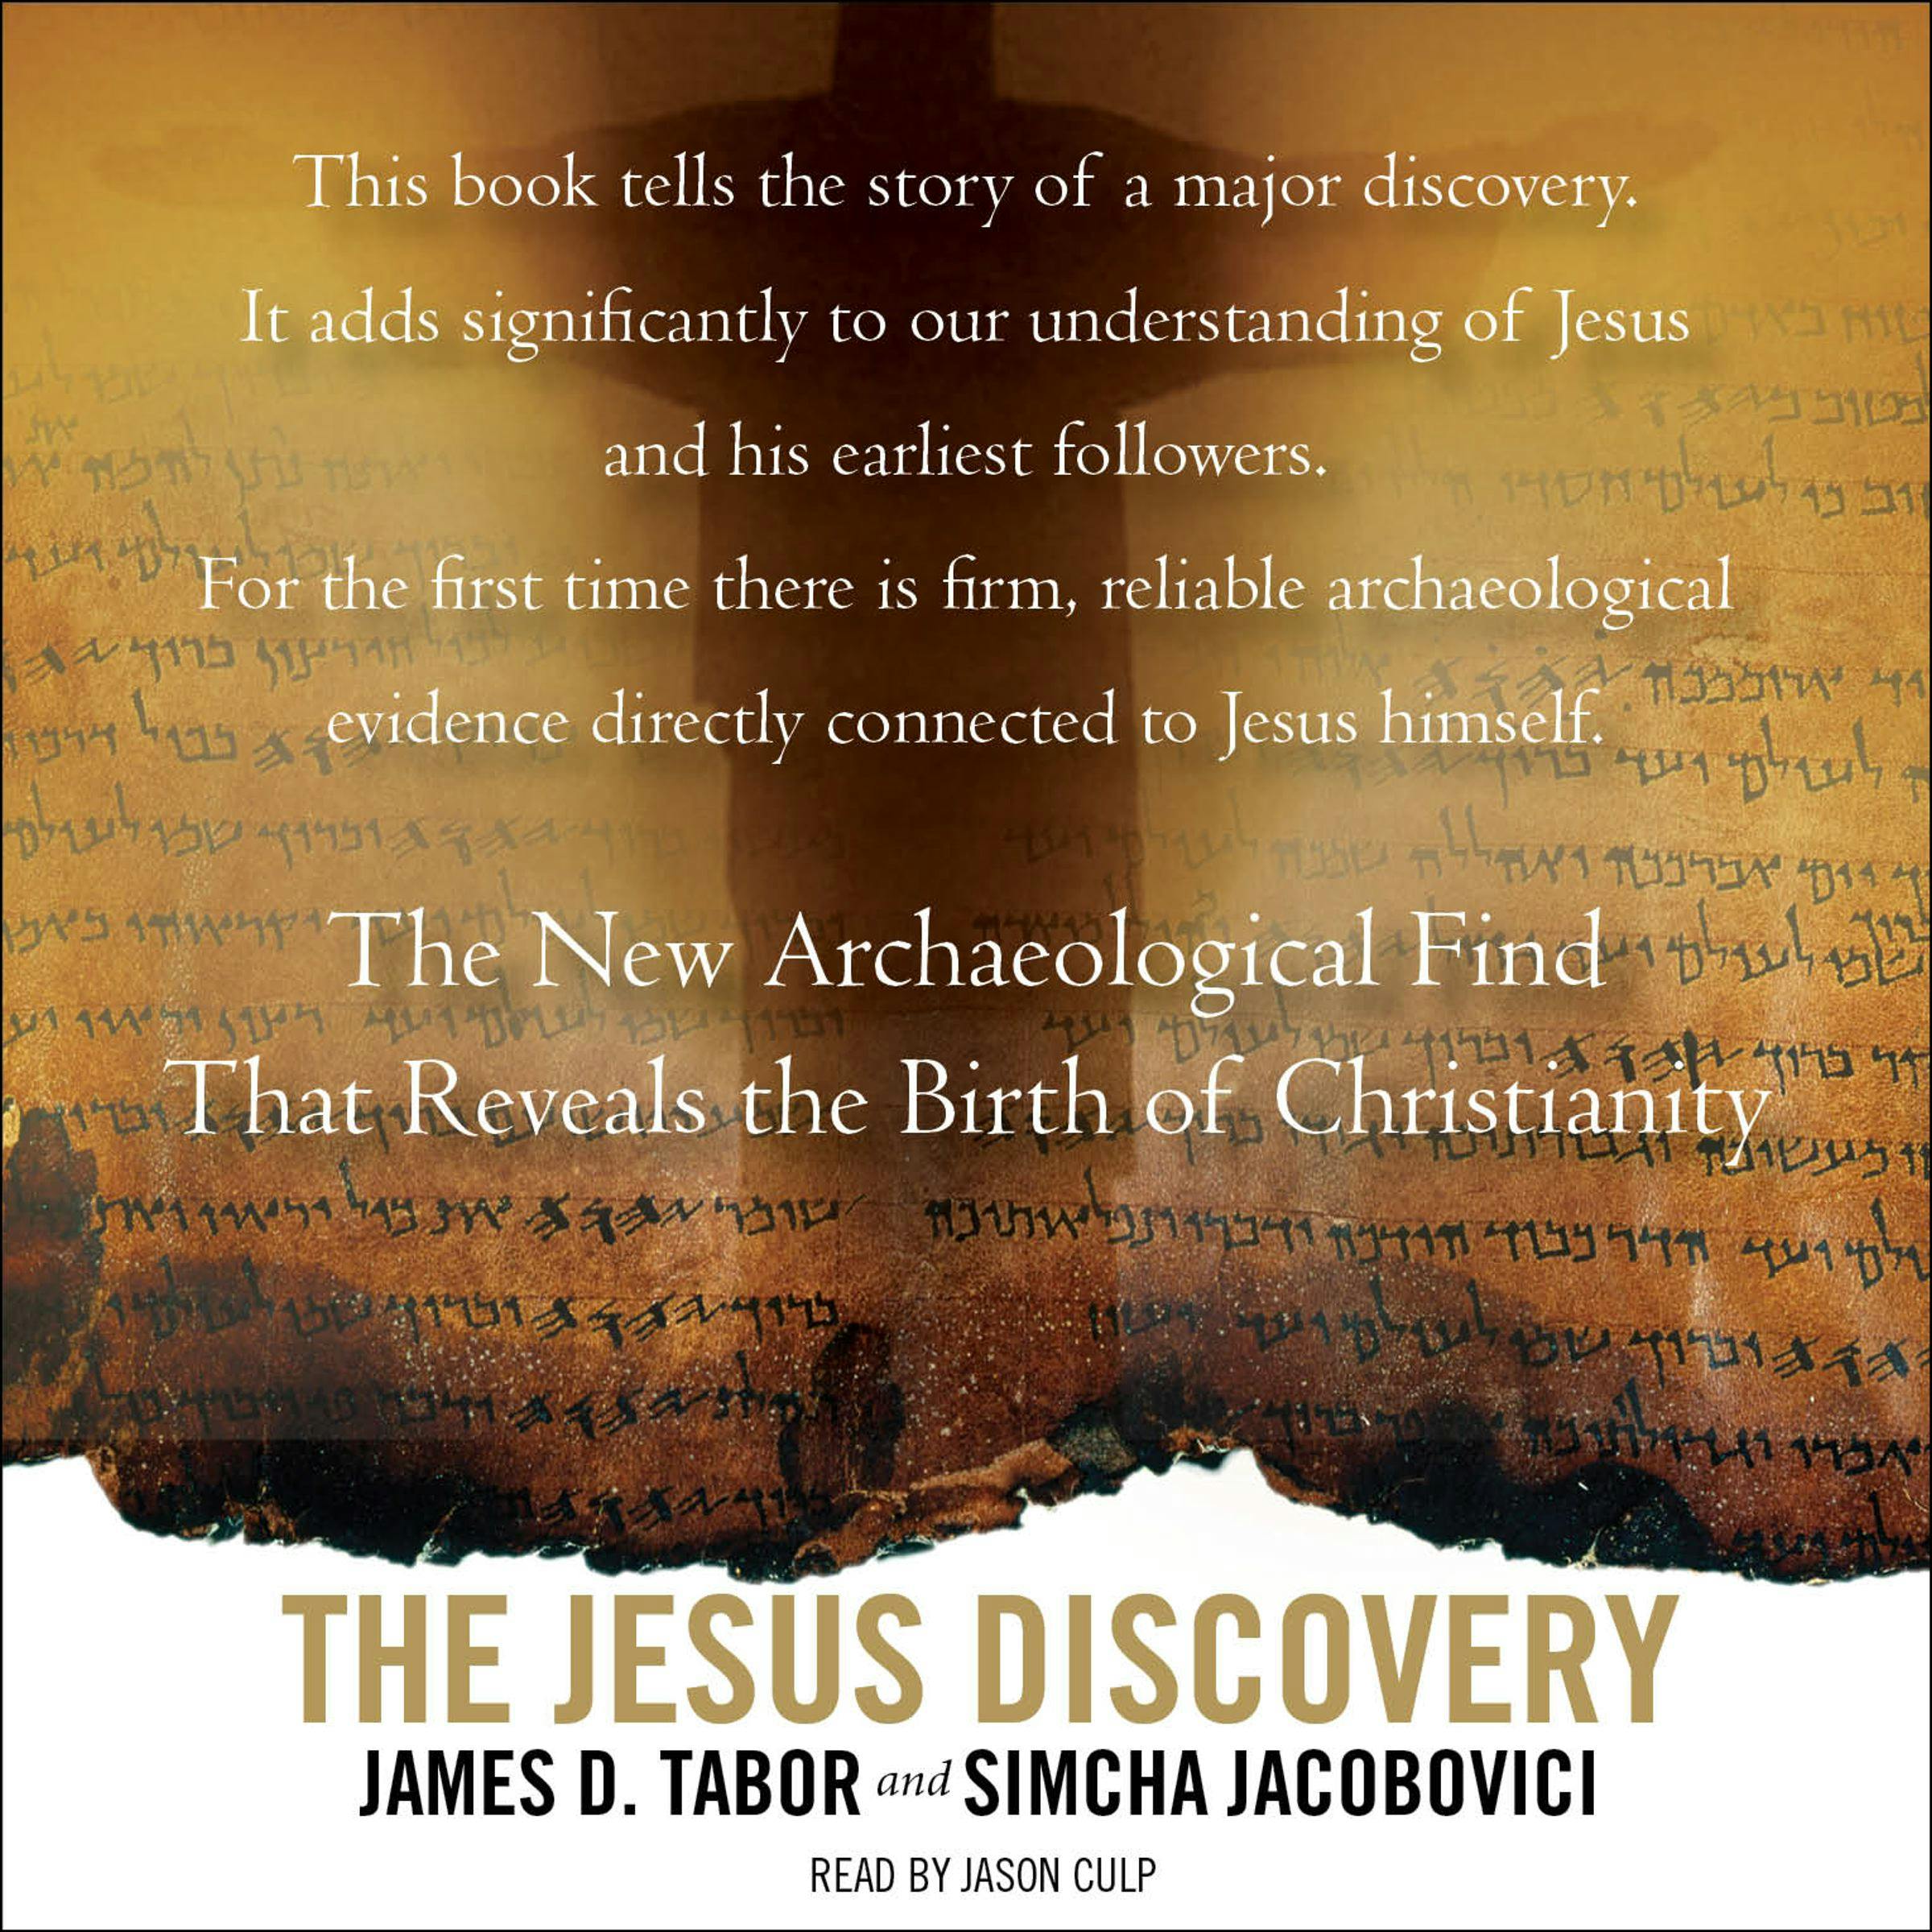 The Jesus Discovery: The Resurrection Tomb that Reveals the Birth of Christianity - Simcha Jacobovici, James D. Tabor